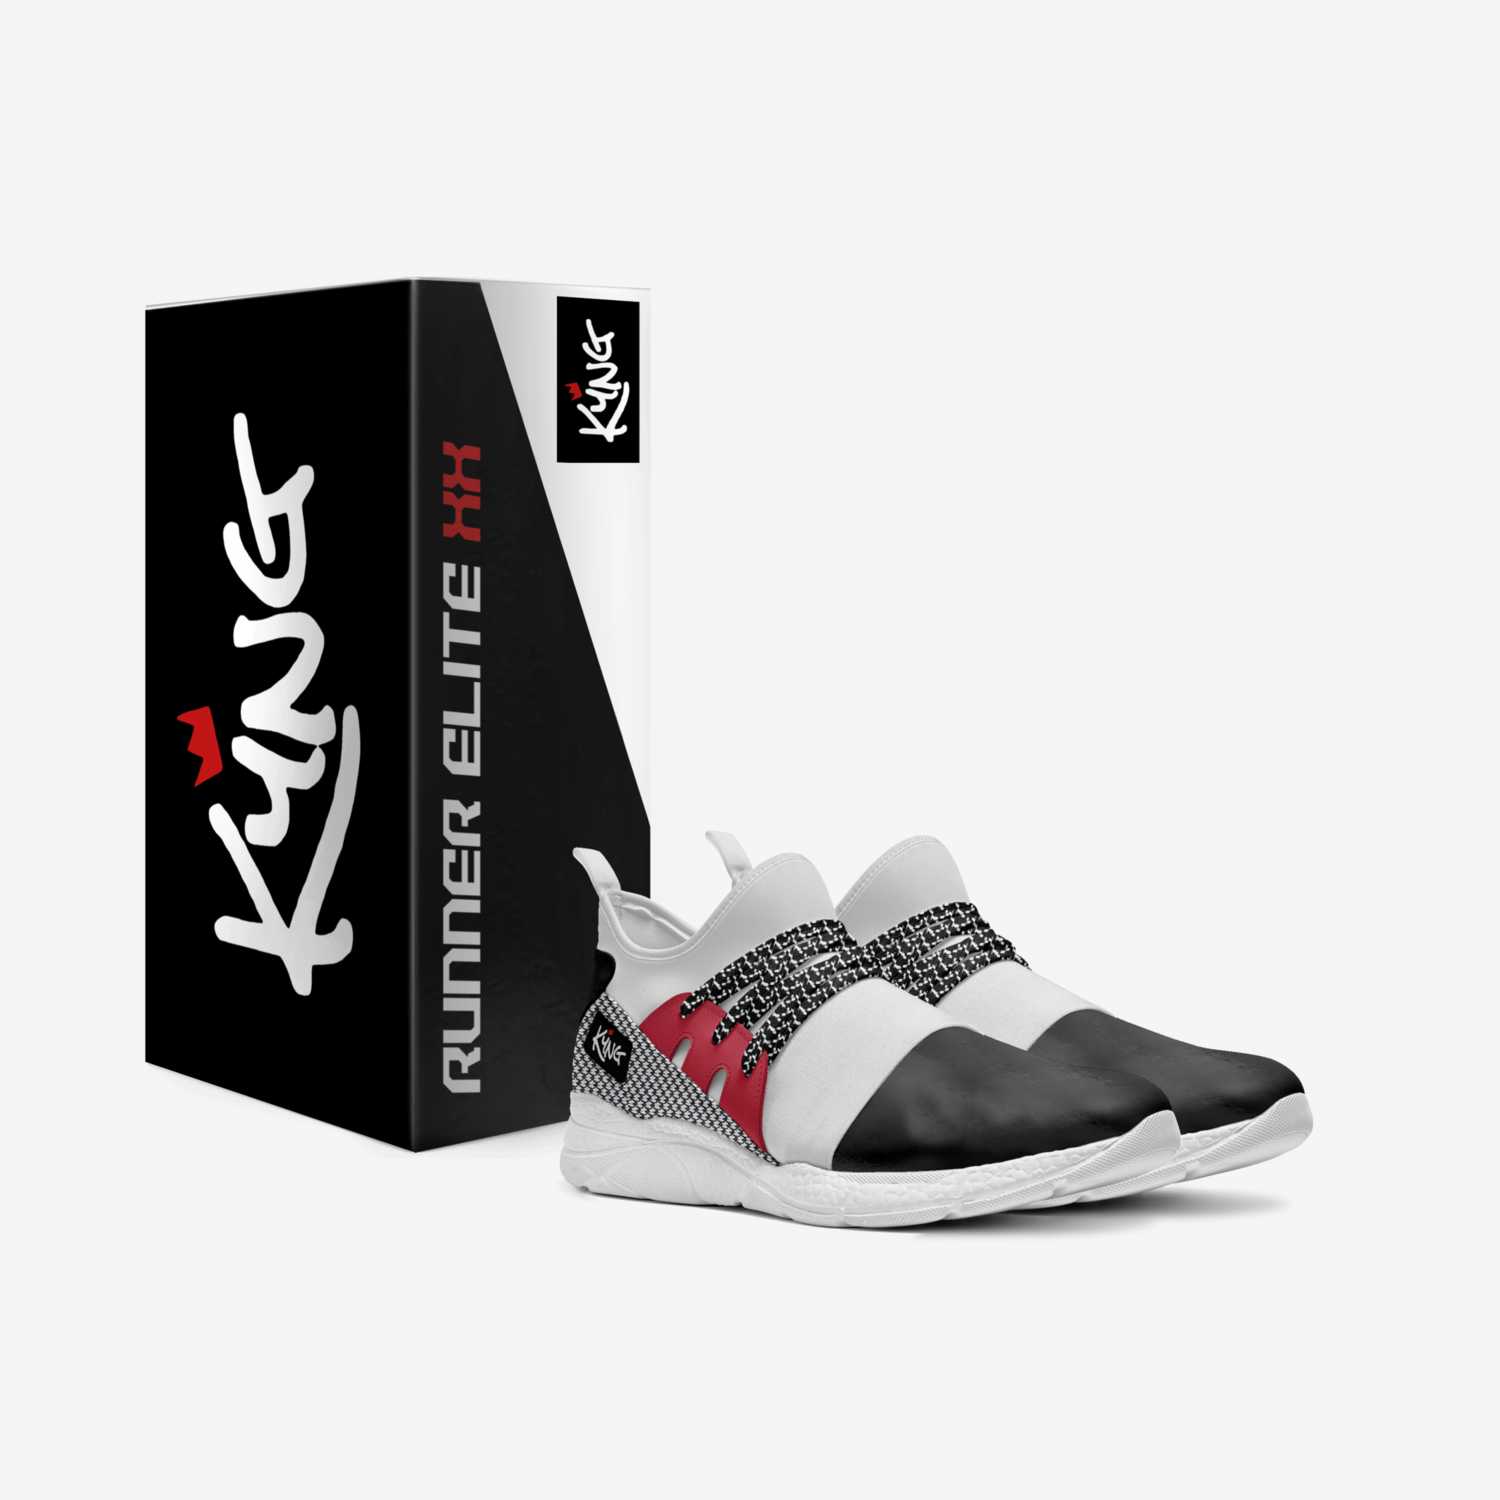 RUNNER ELITE XX custom made in Italy shoes by Kyng Brand Co. | Box view